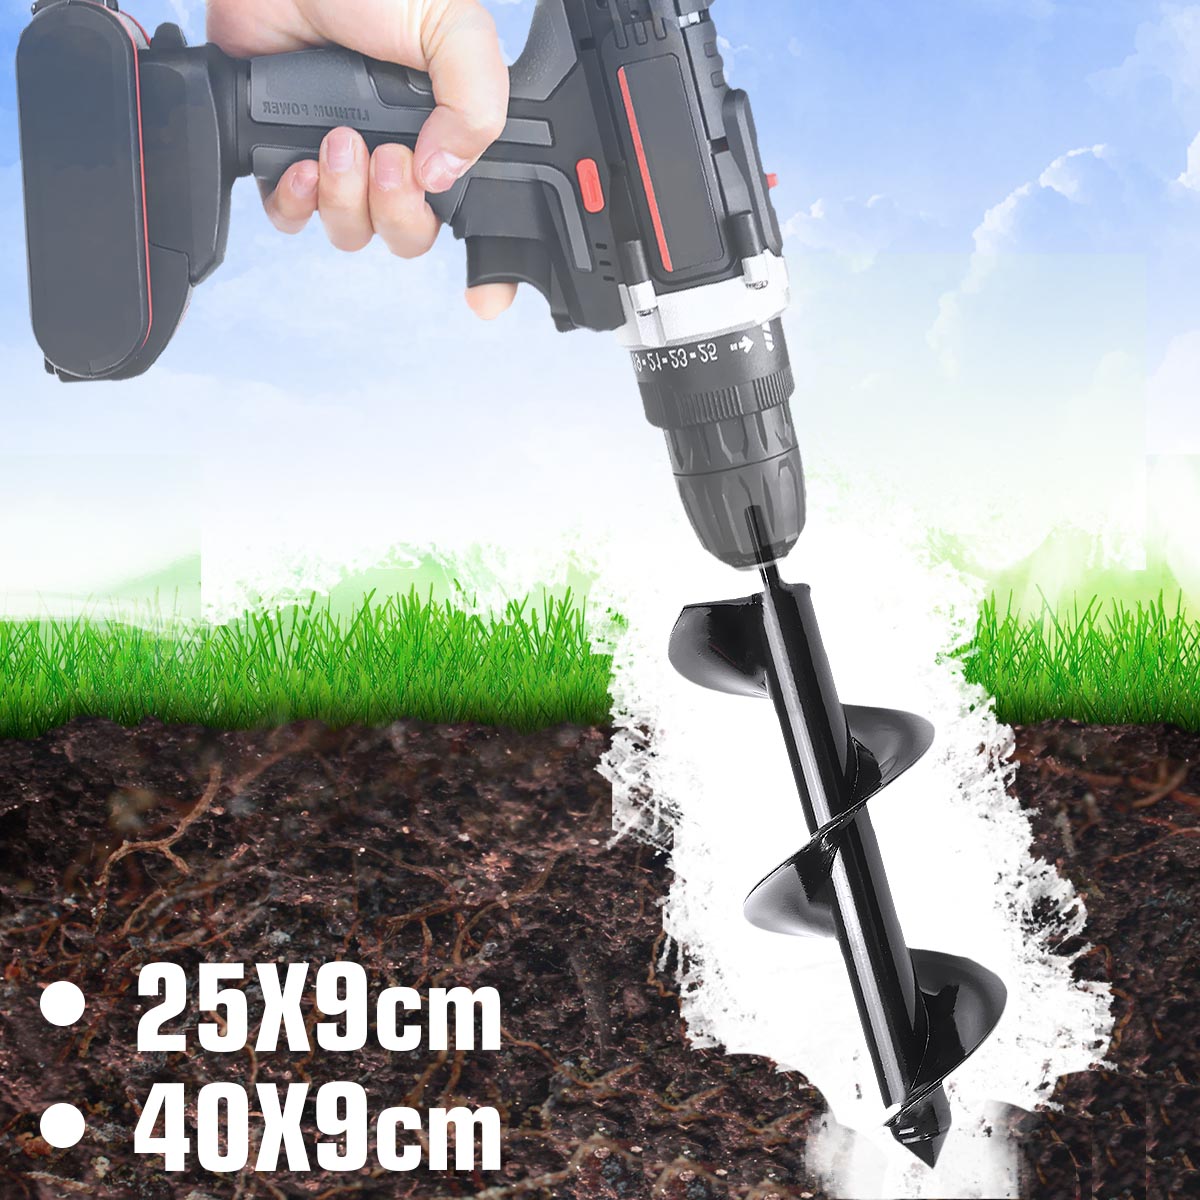 Earth Auger Hole Digger Tool Garden Planting Machine Drill Bit Fence Borer Post Post Hole Digger Garden Auger Yard Tool